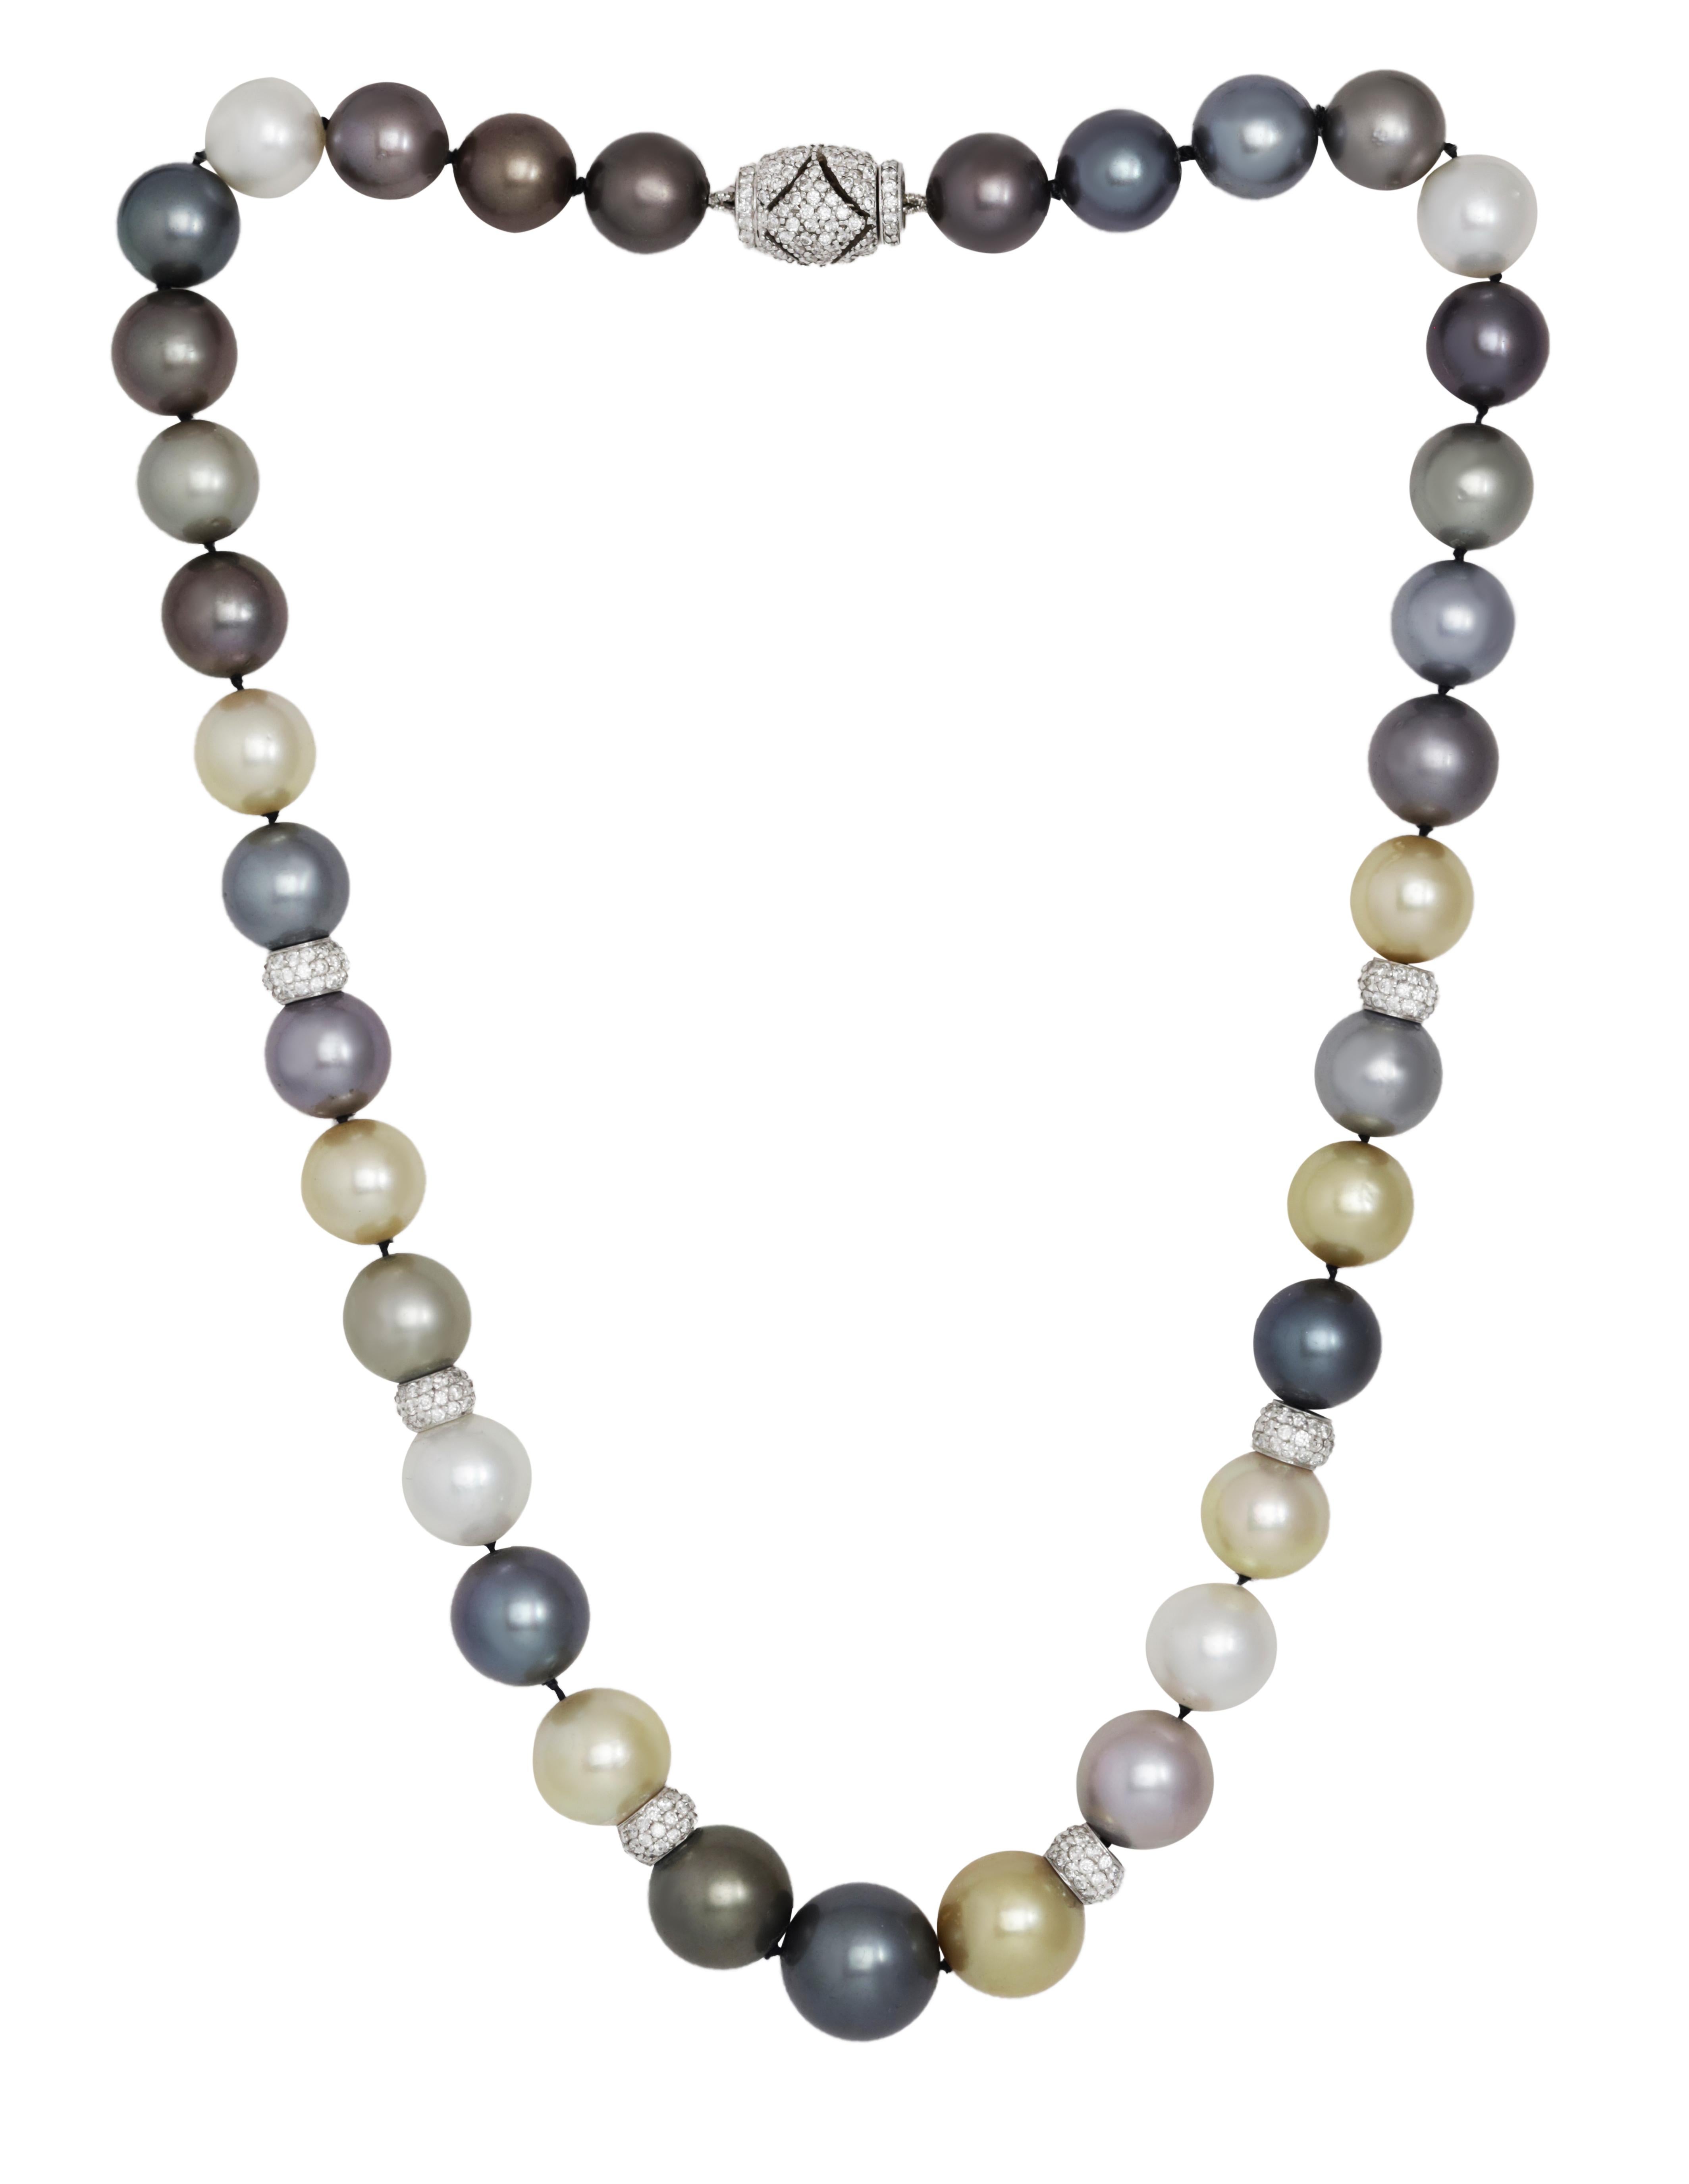 Brilliant Cut Diana M. Diamond pearl necklace adorned with 10-14 mm Tahitian south sea pearls  For Sale